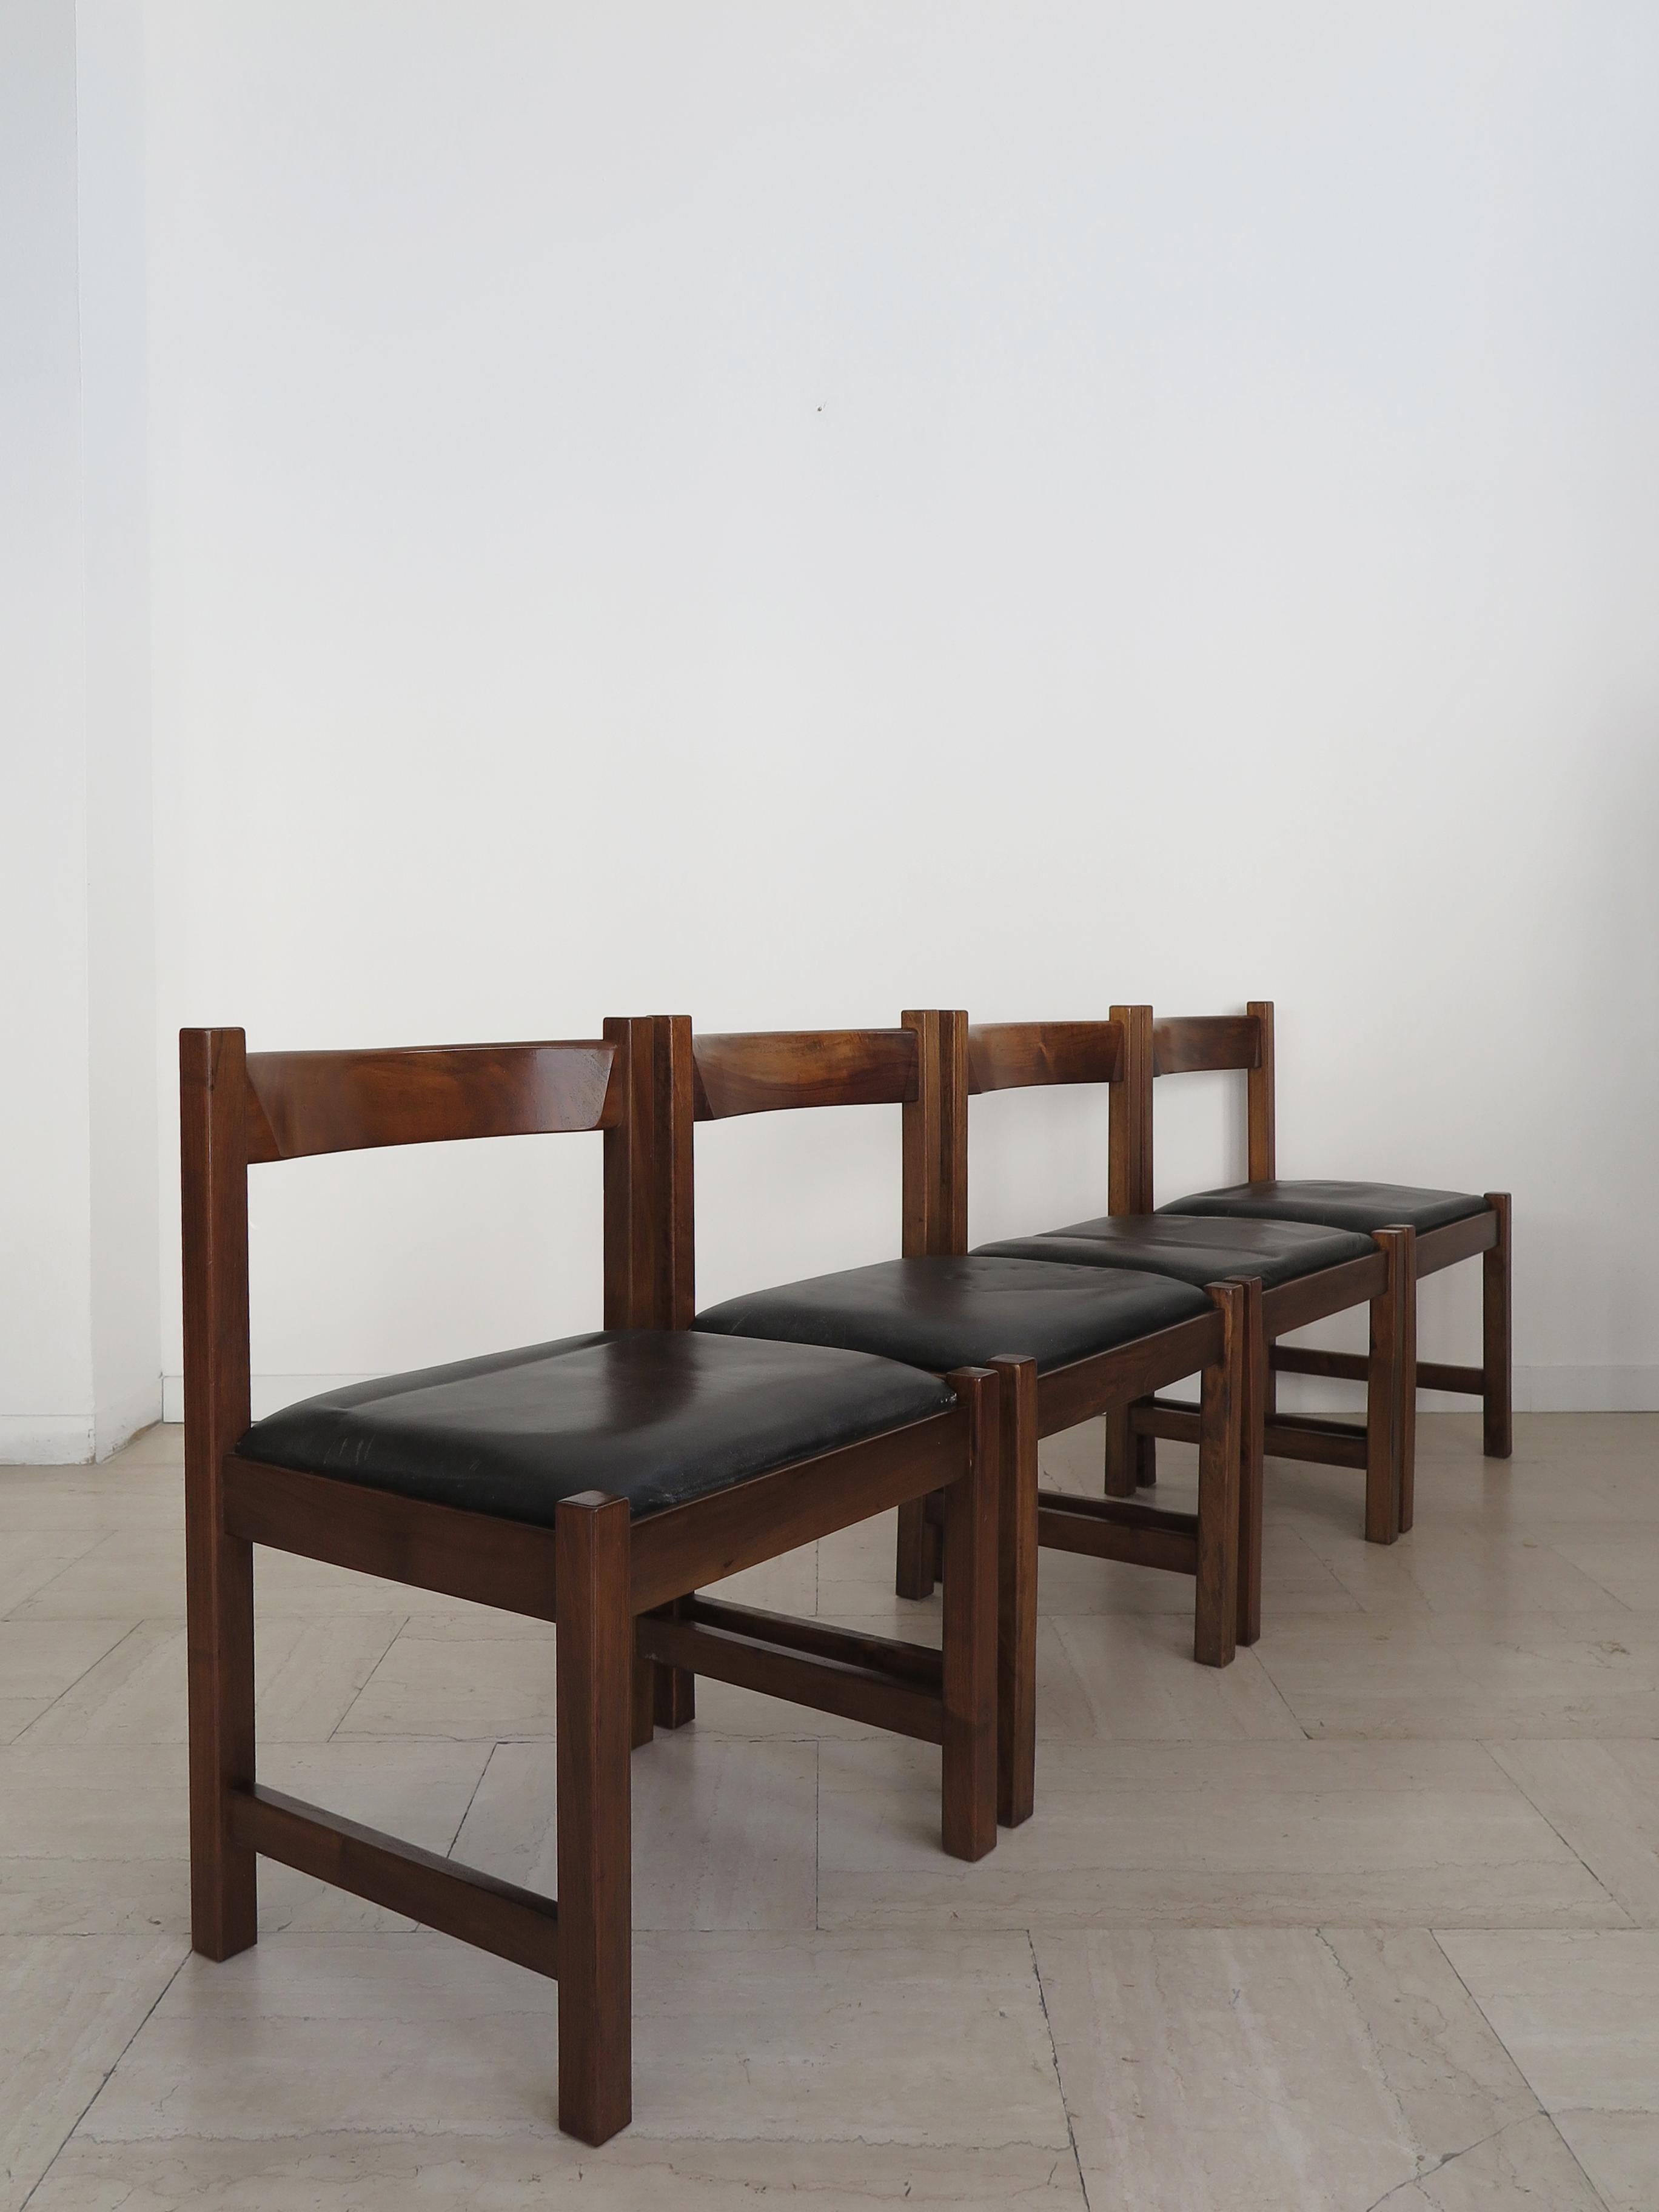 Set of four dining chairs from the Torbecchia S.20 series designed by Giovanni Michelucci and produced by Poltronova with walnut frame and leather upholstered seat, made in Italy 1964.
G. Michelucci mark branded on each chair.

The chairs are in